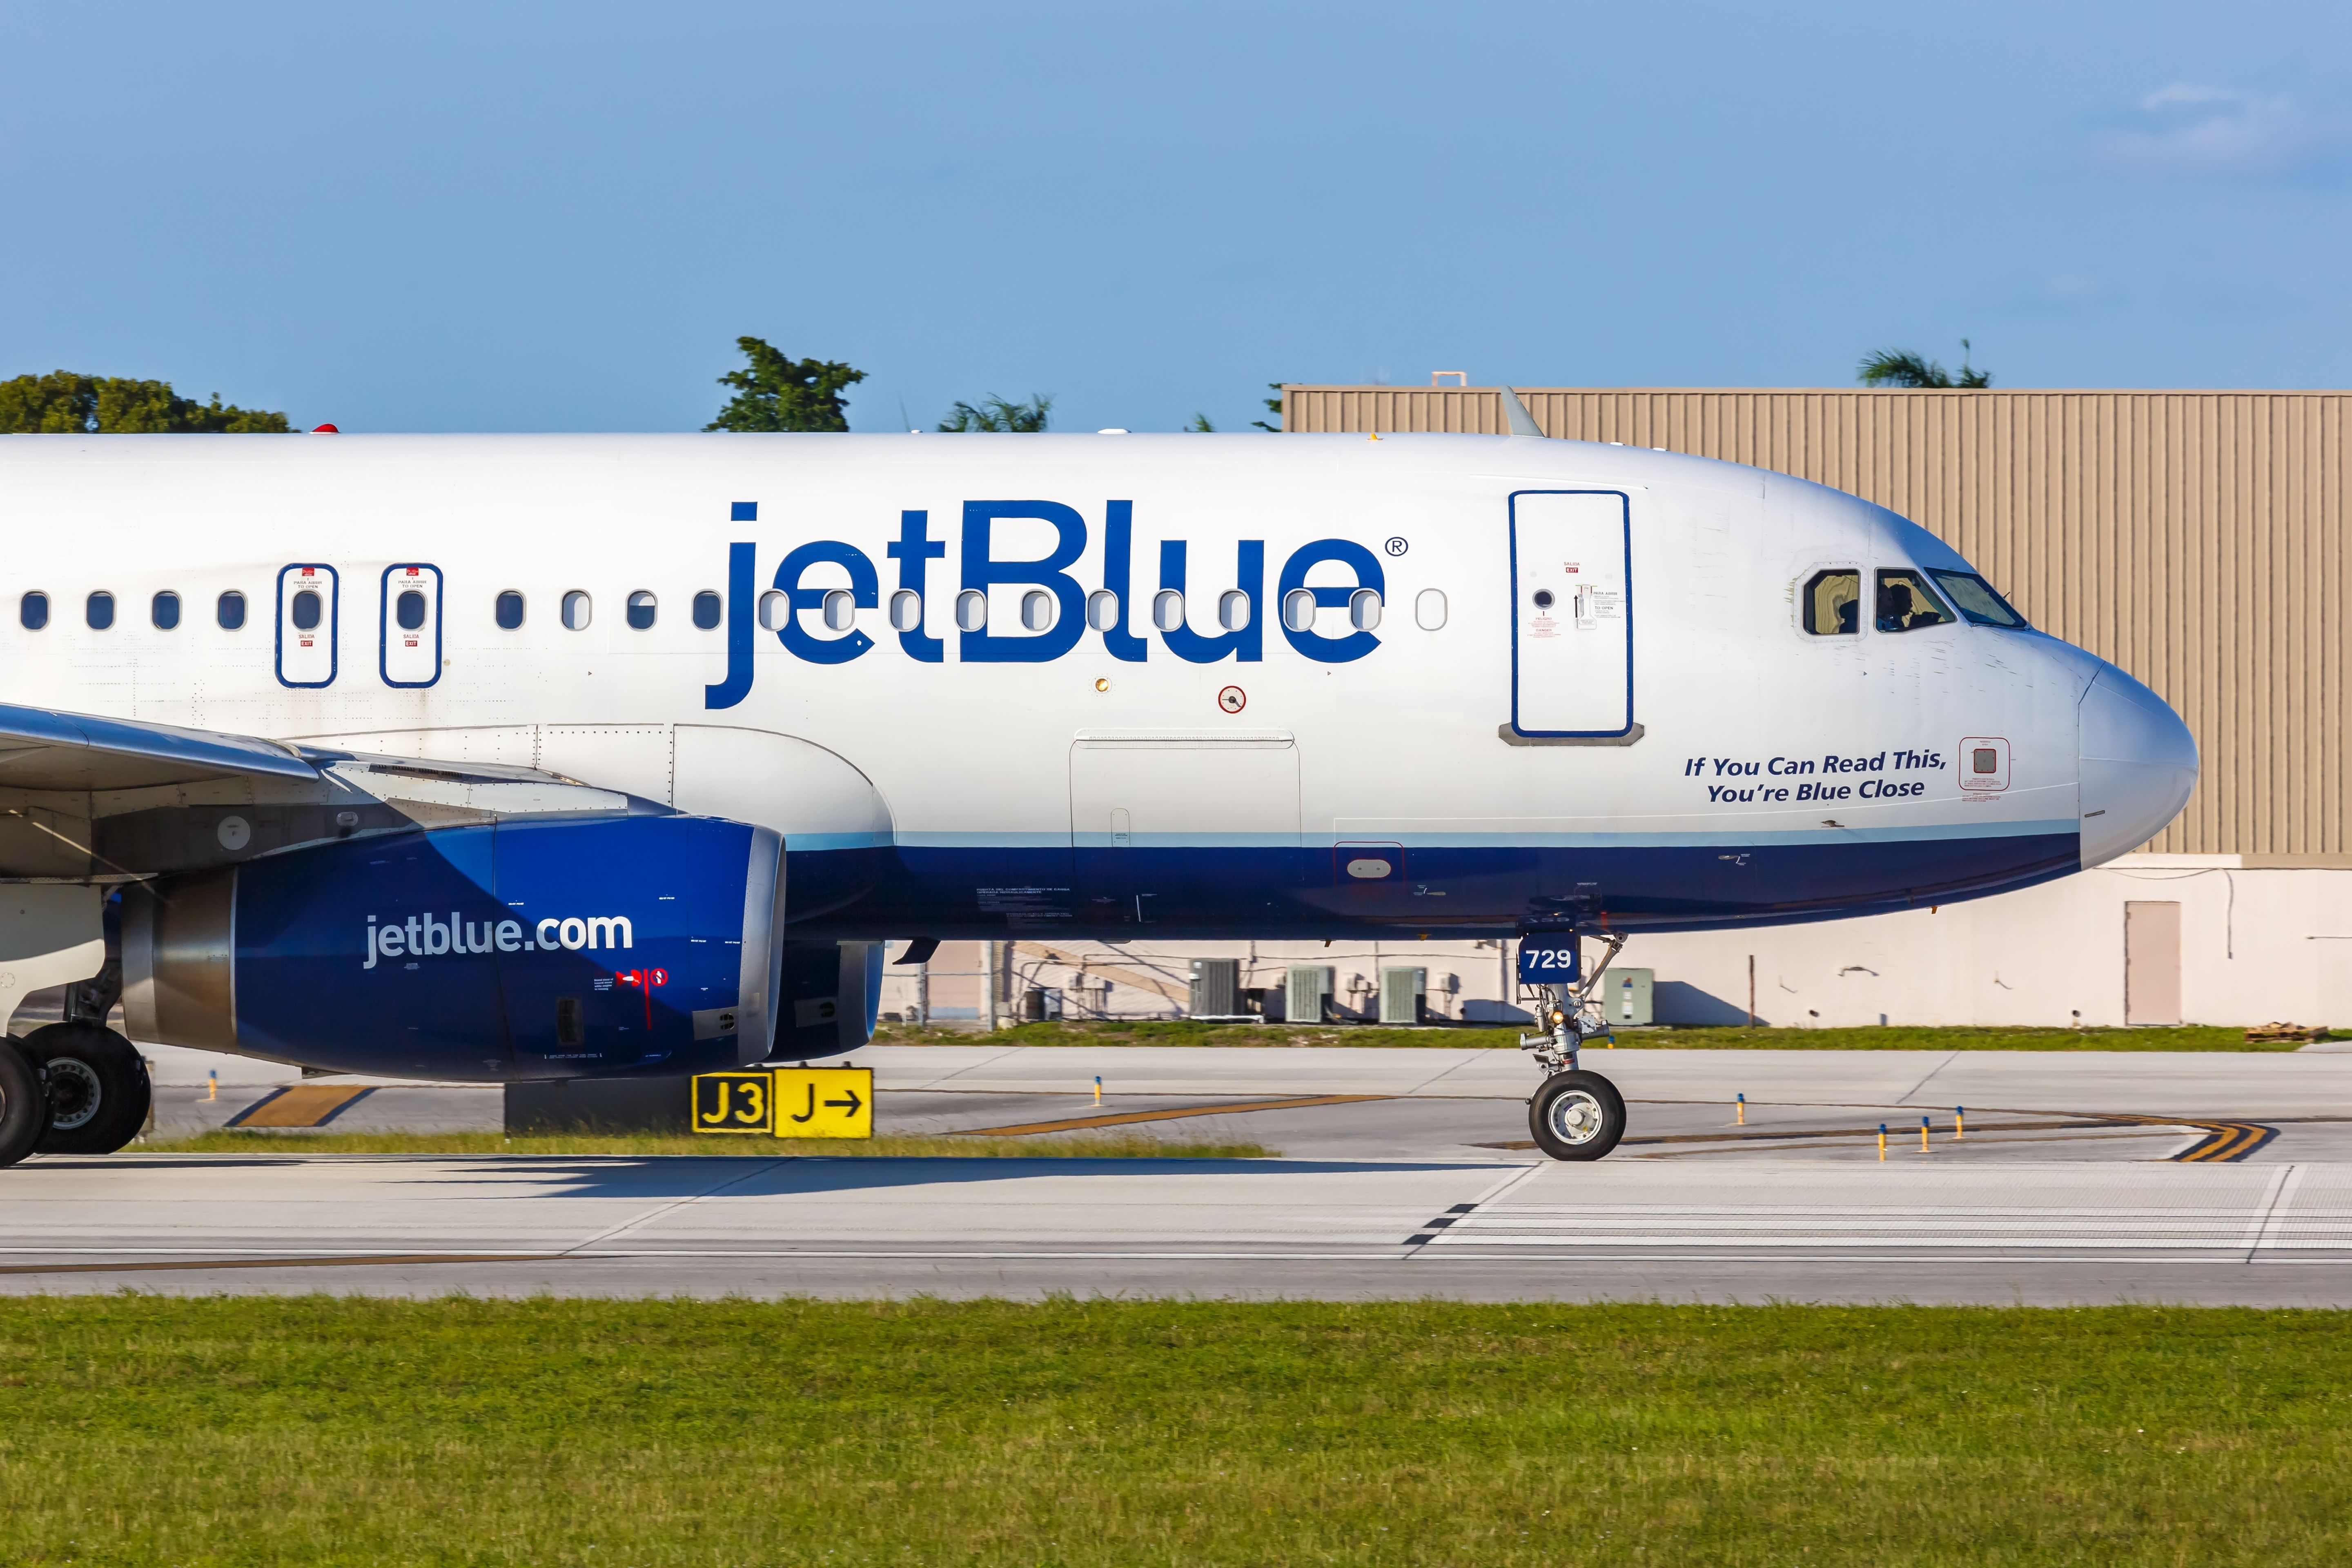 A JetBlue Airbus A320 on an airport apron.